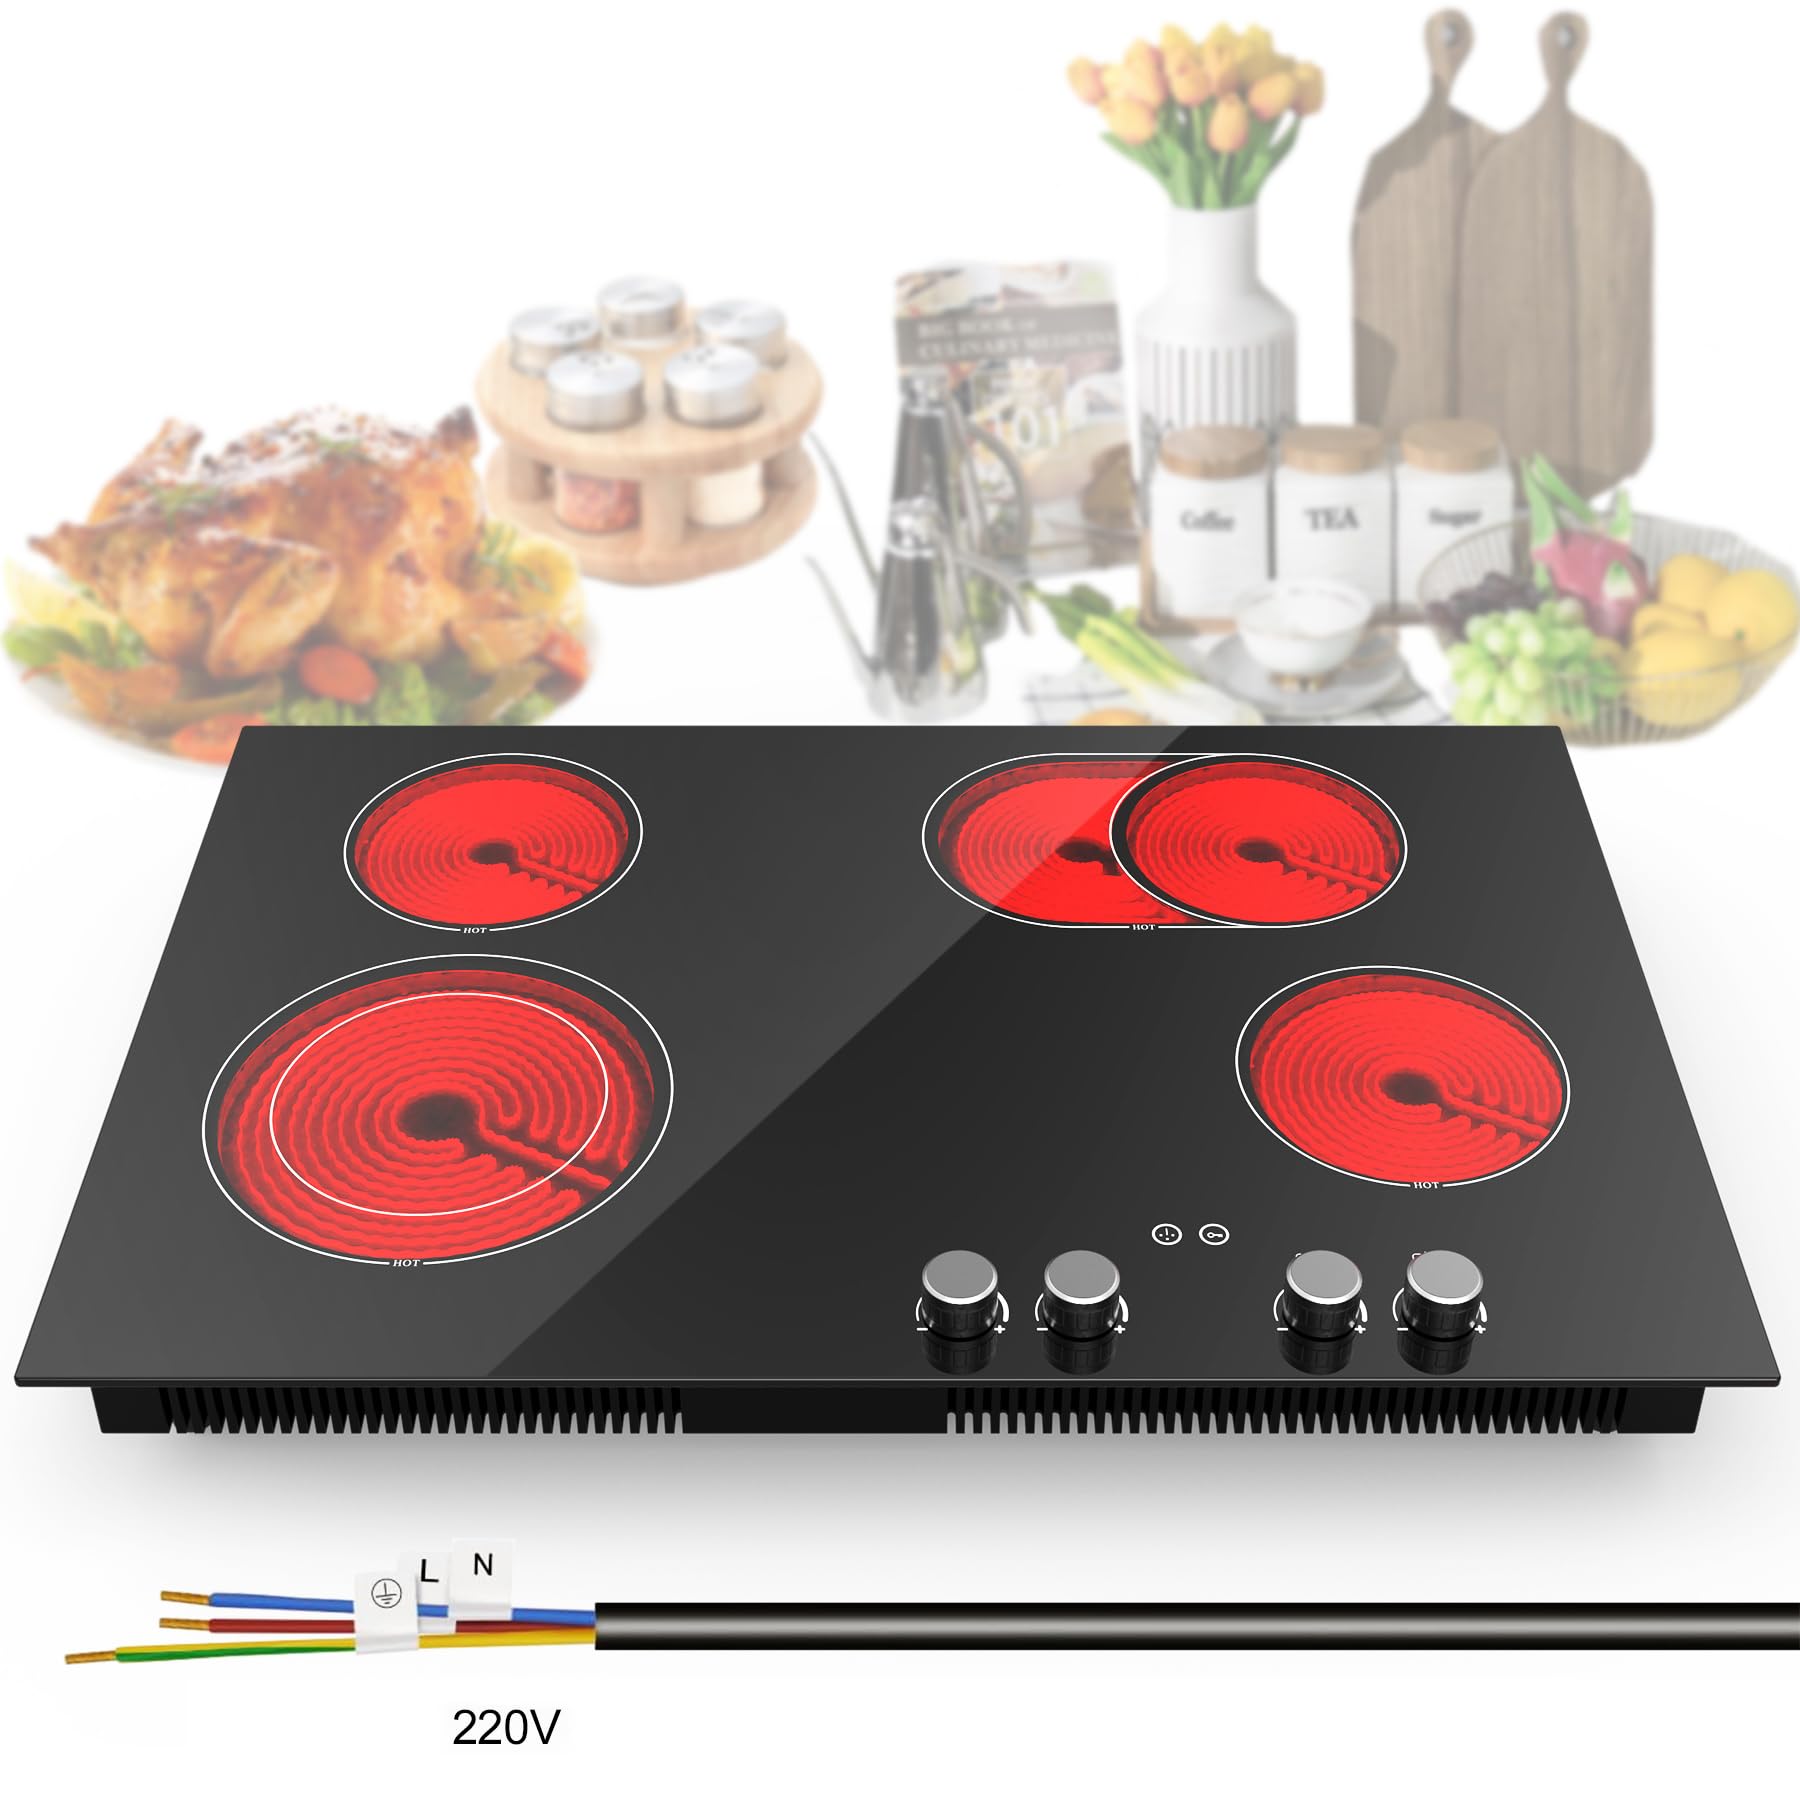 Electric Cooktop 30 Inch, Electric Stove 4 Burner Built-in Electric Cooktop,7200W Radiant Electric Cooktop Stove Itop,9 Power Levels,Timer,Knob Control,Kid Safety Lock,220-240V for Hard Wire(No Plug)